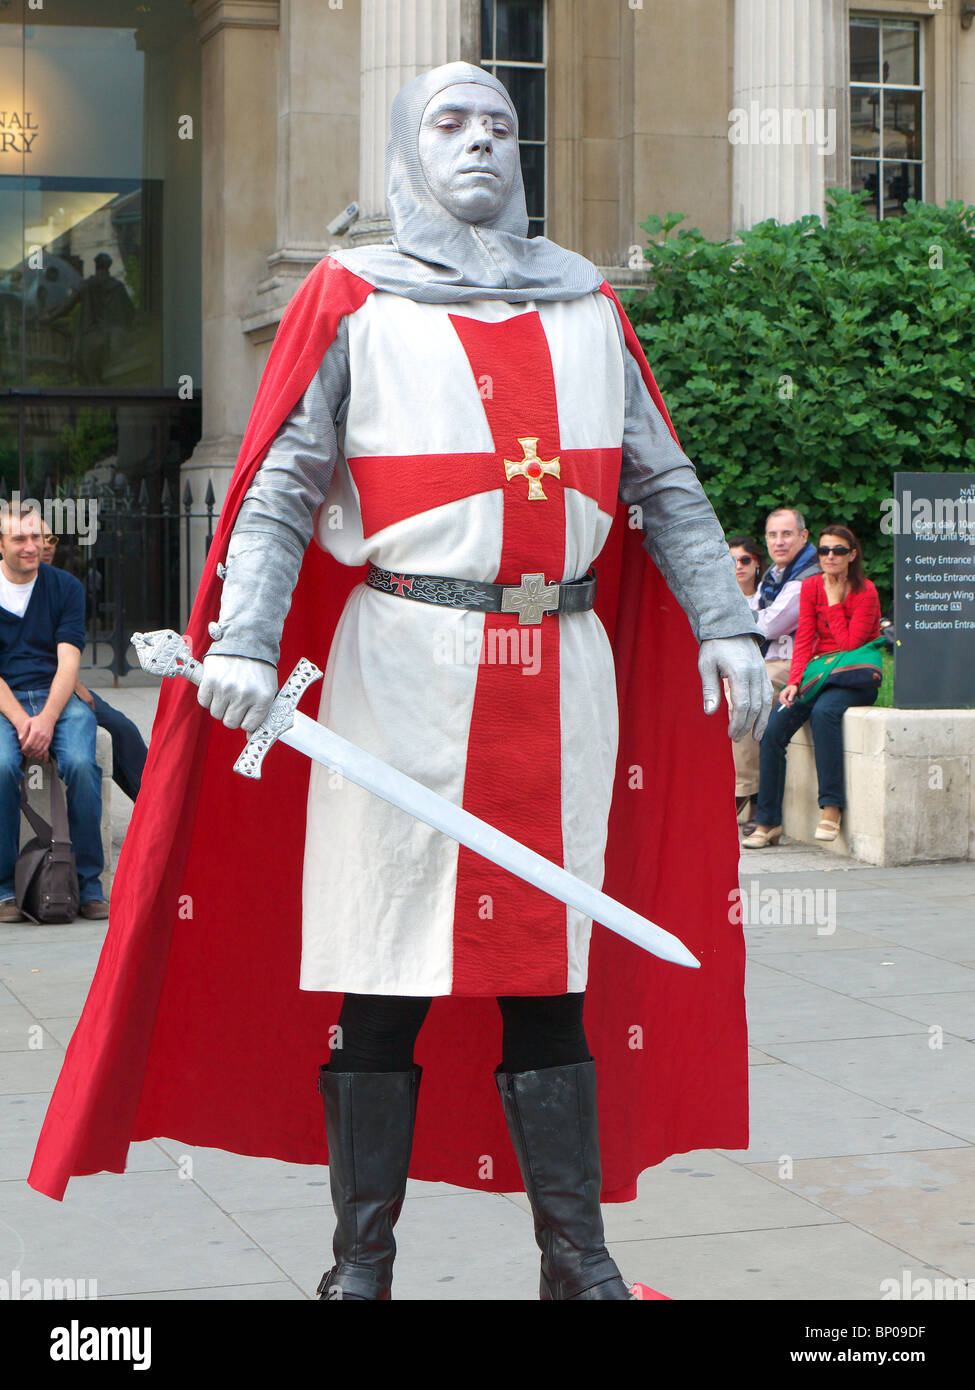 A street performer dressed as a crusader Stock Photo